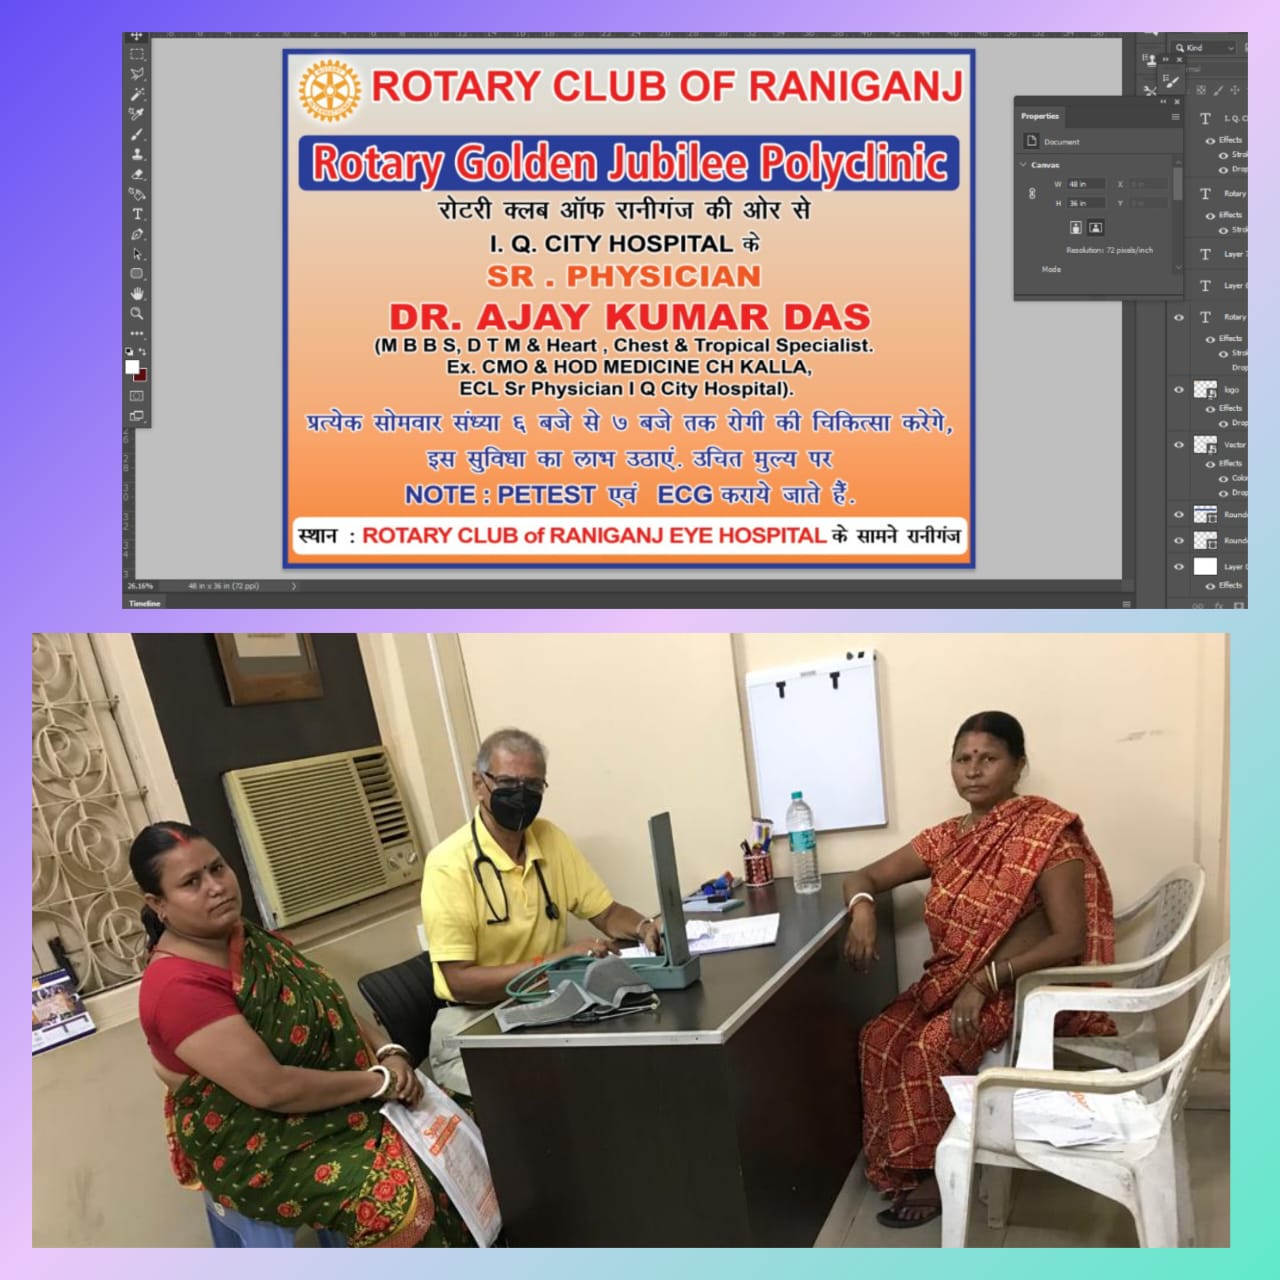 R C Raniganj started a Rotary Golden Jubilee Polyclinic for free treatment of Needy .